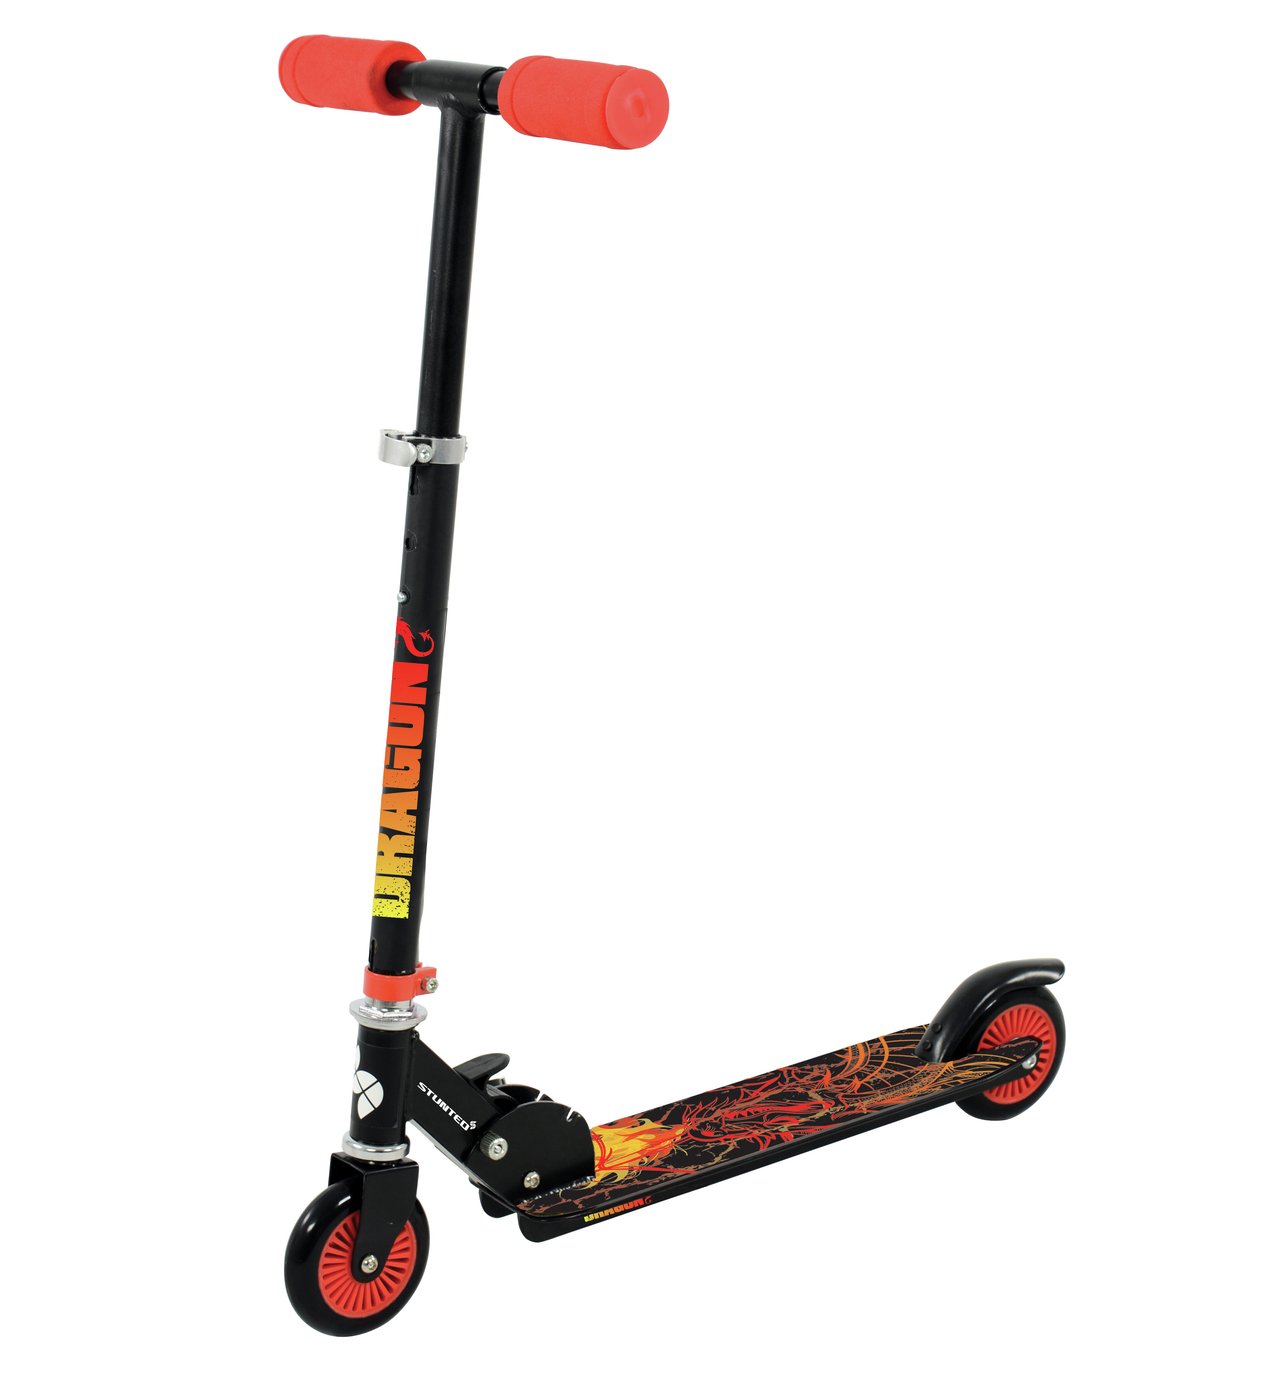 Stunted Dragon Stunt Scooter Review